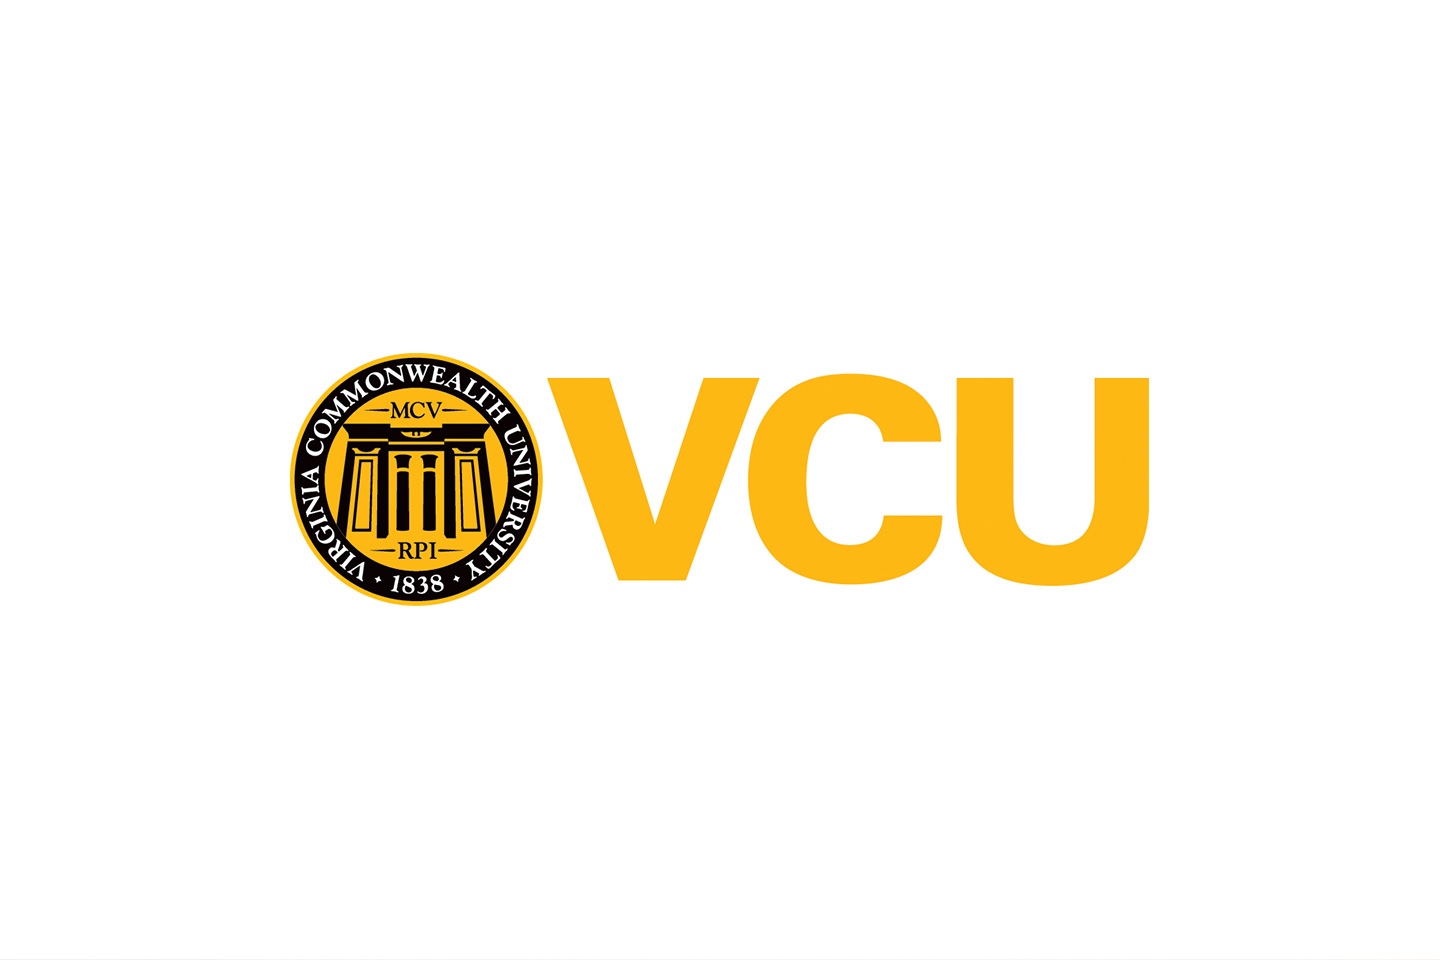 Official seal for VCU in black and gold.